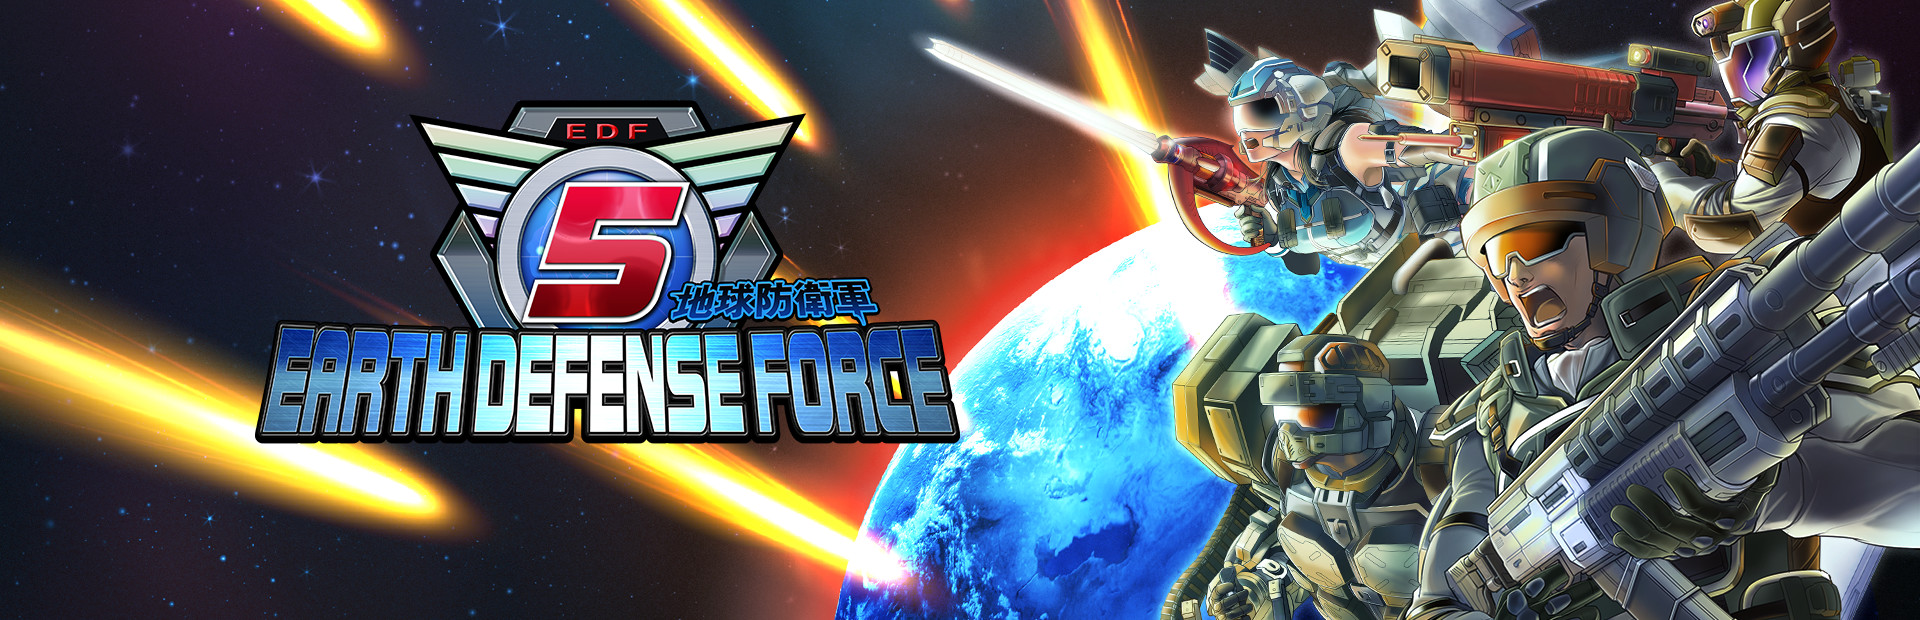 EARTH DEFENSE FORCE 5 cover image